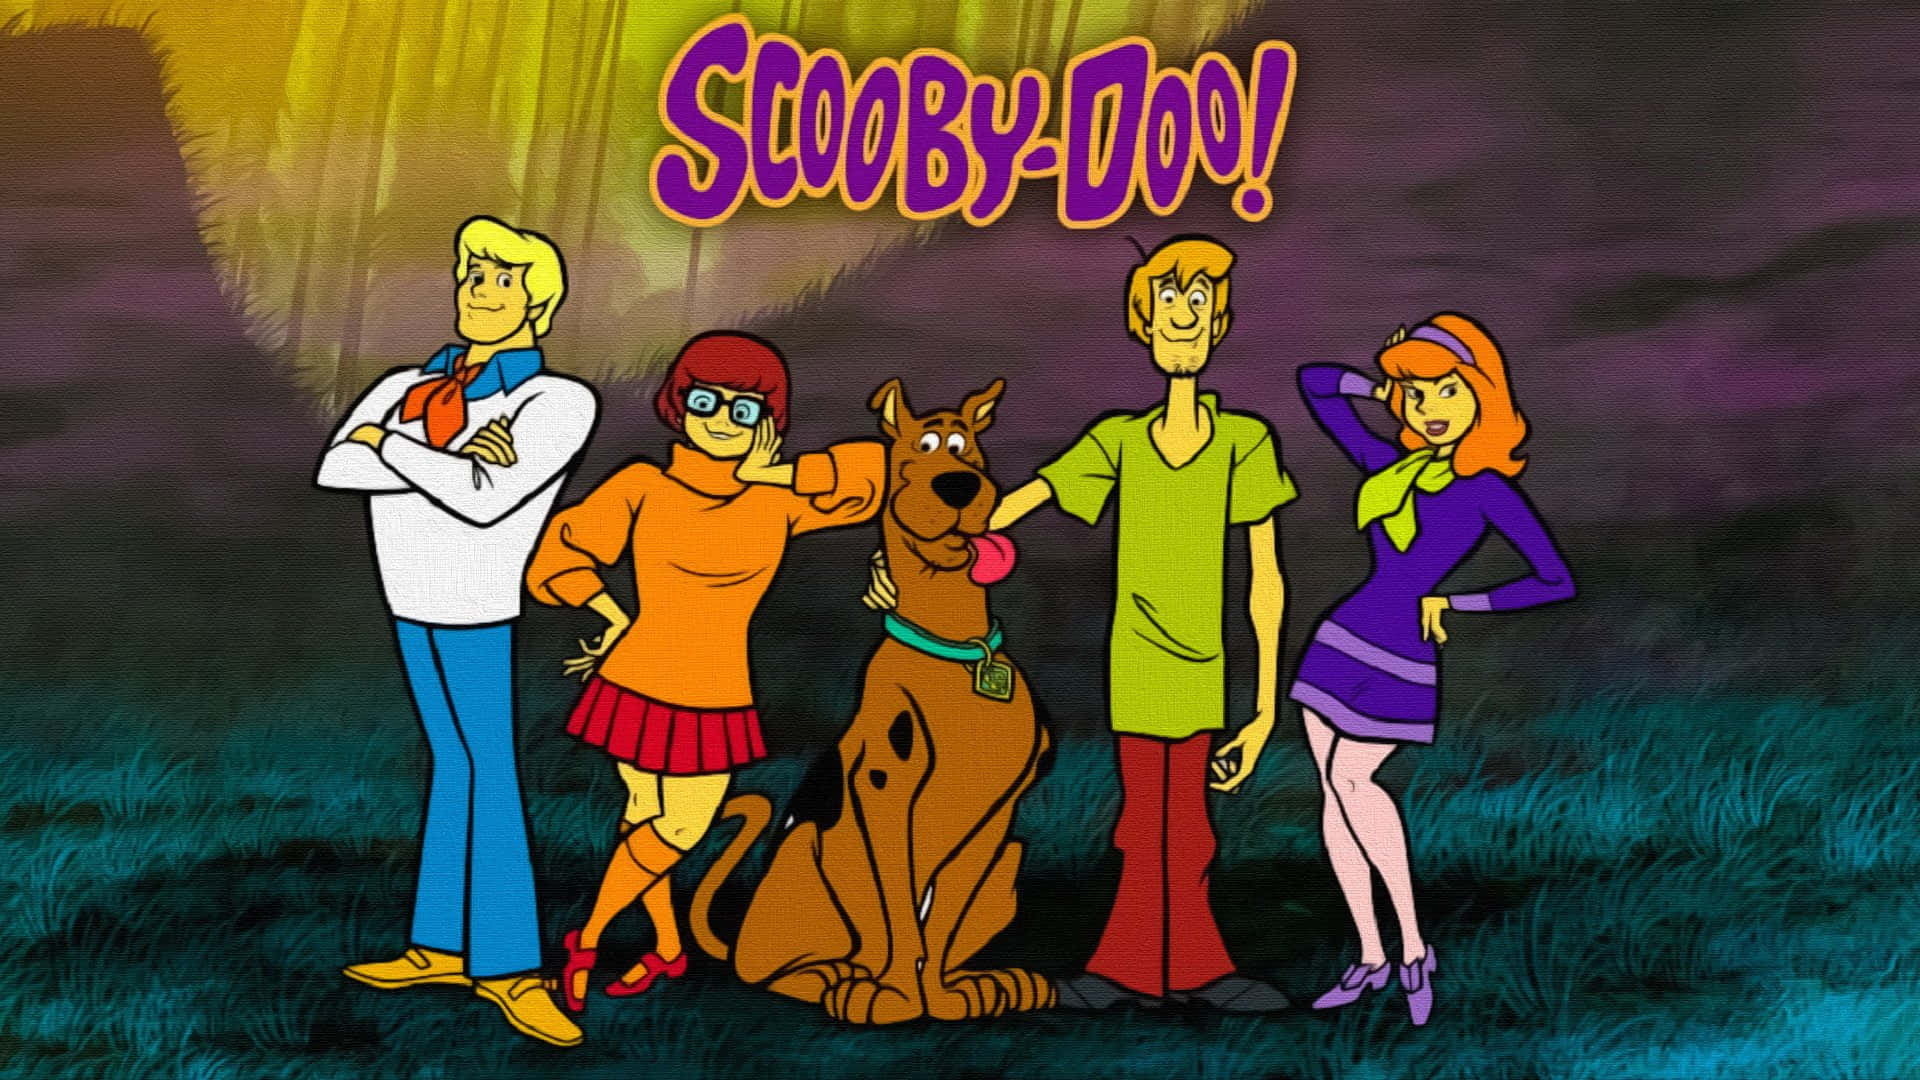 Download Join Scooby Doo in his A-Mazing Adventures! | Wallpapers.com